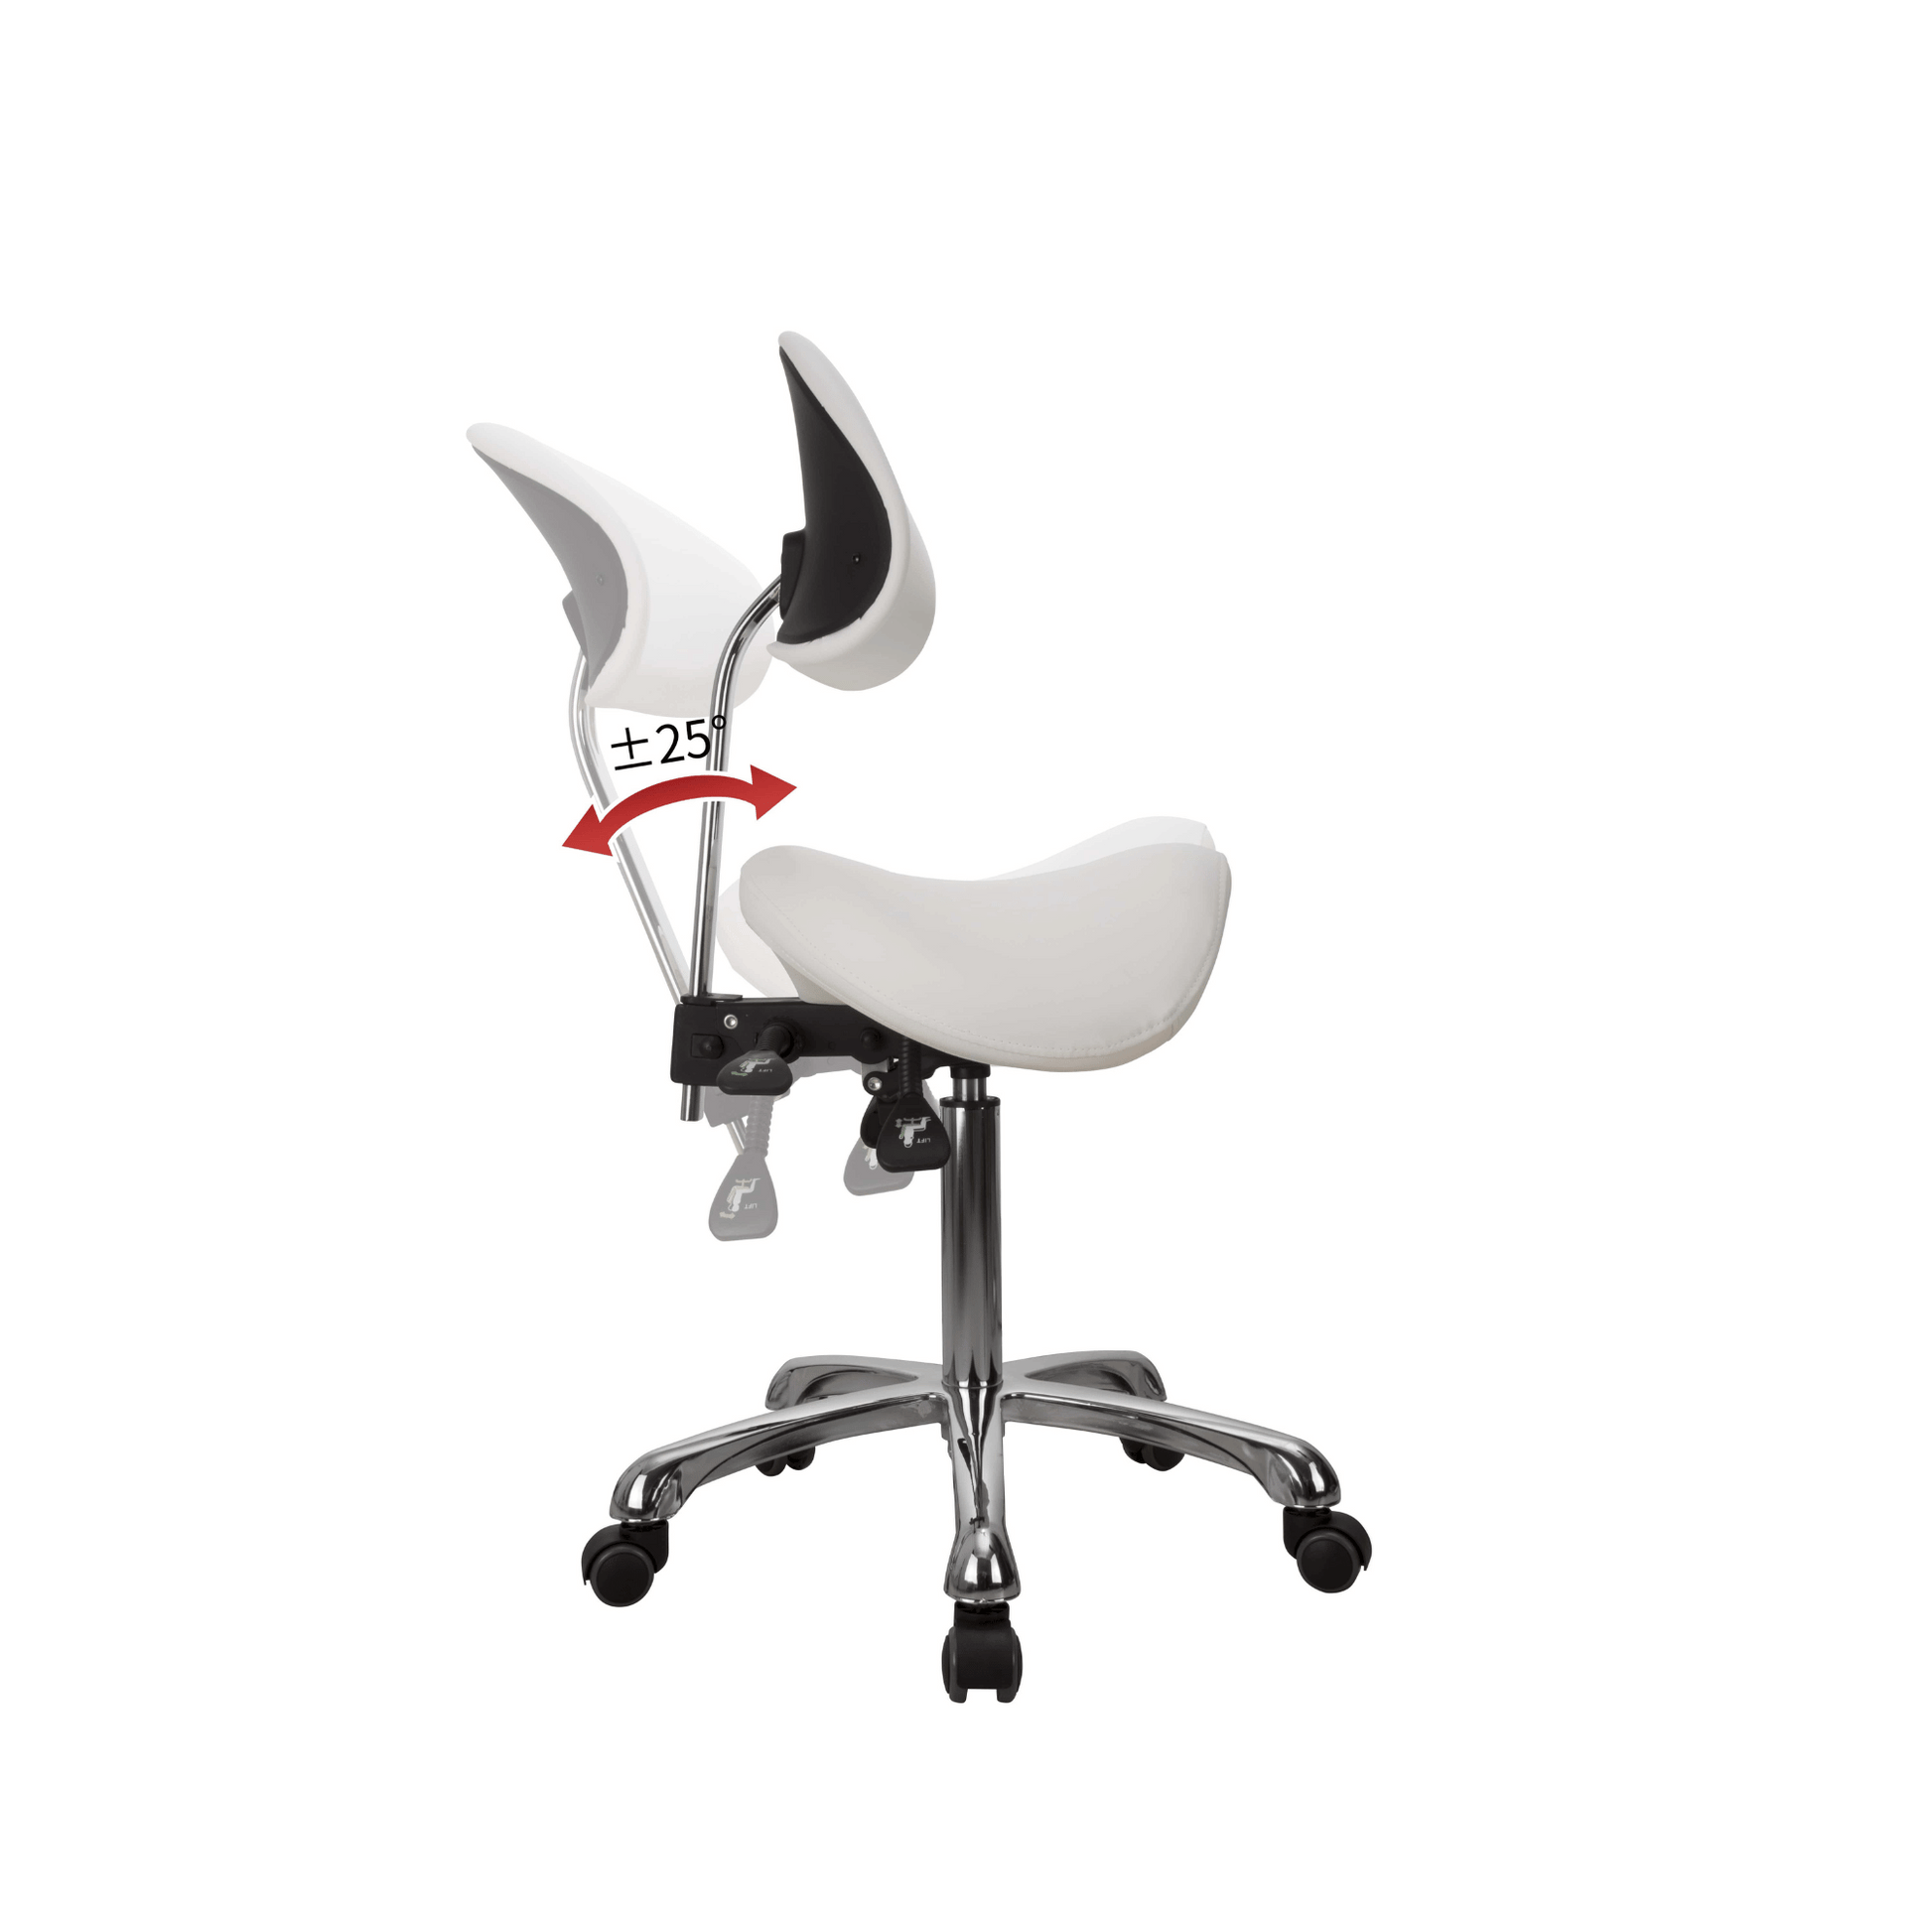 The Lolli Saddle Stool White Adjustable height and back Image 1